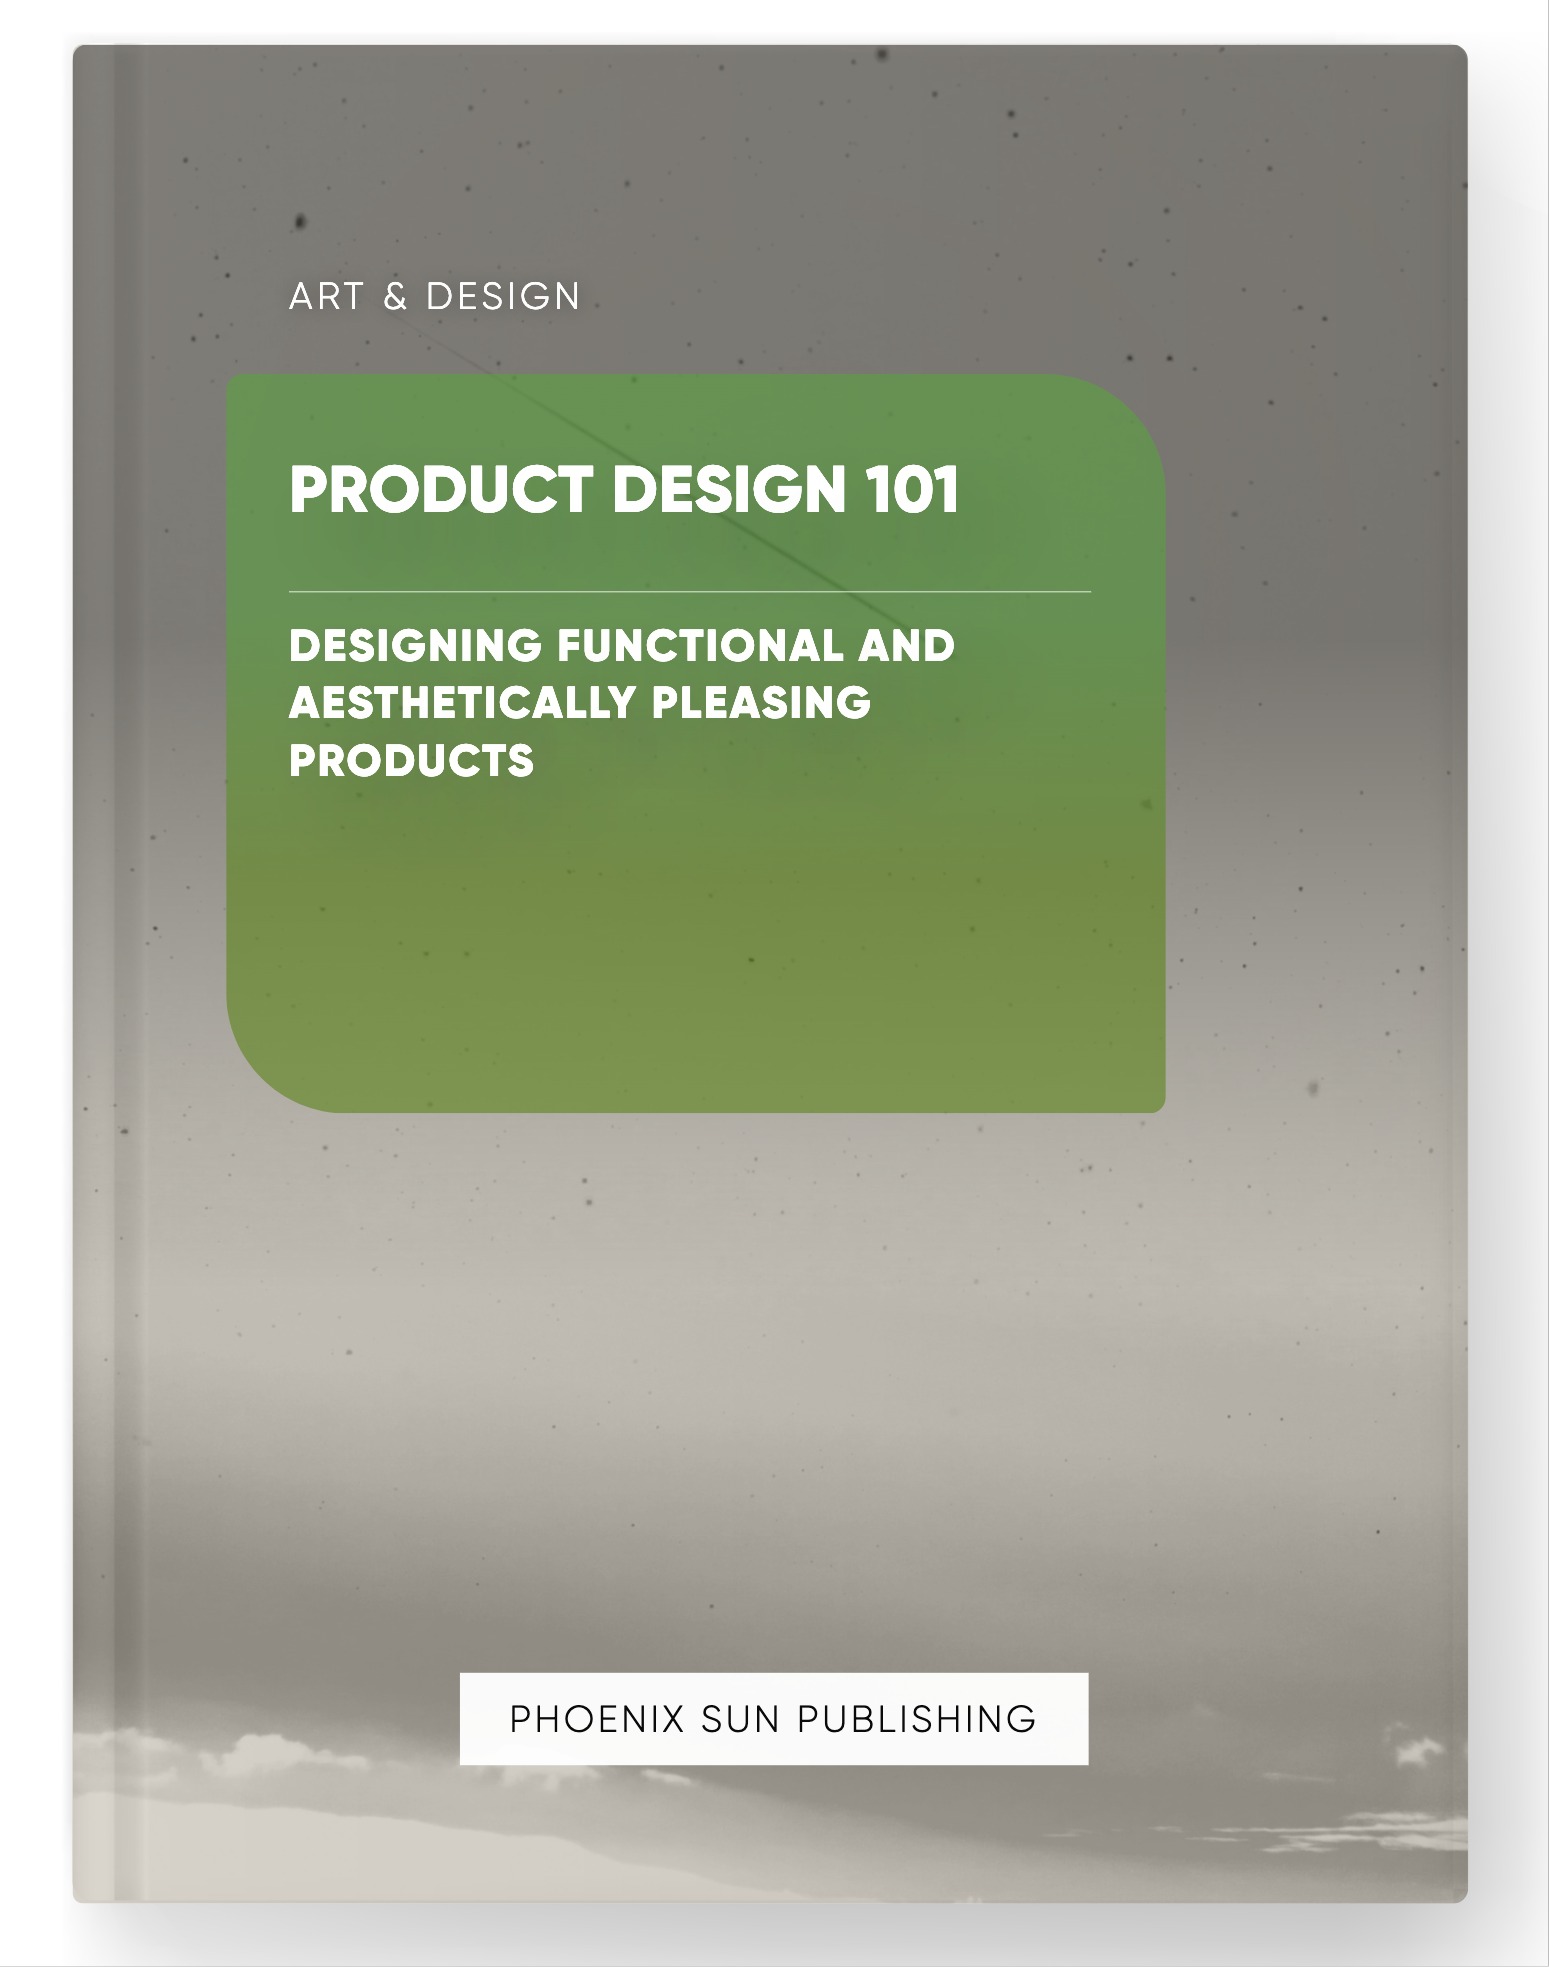 Product Design 101 – Designing Functional and Aesthetically Pleasing Products